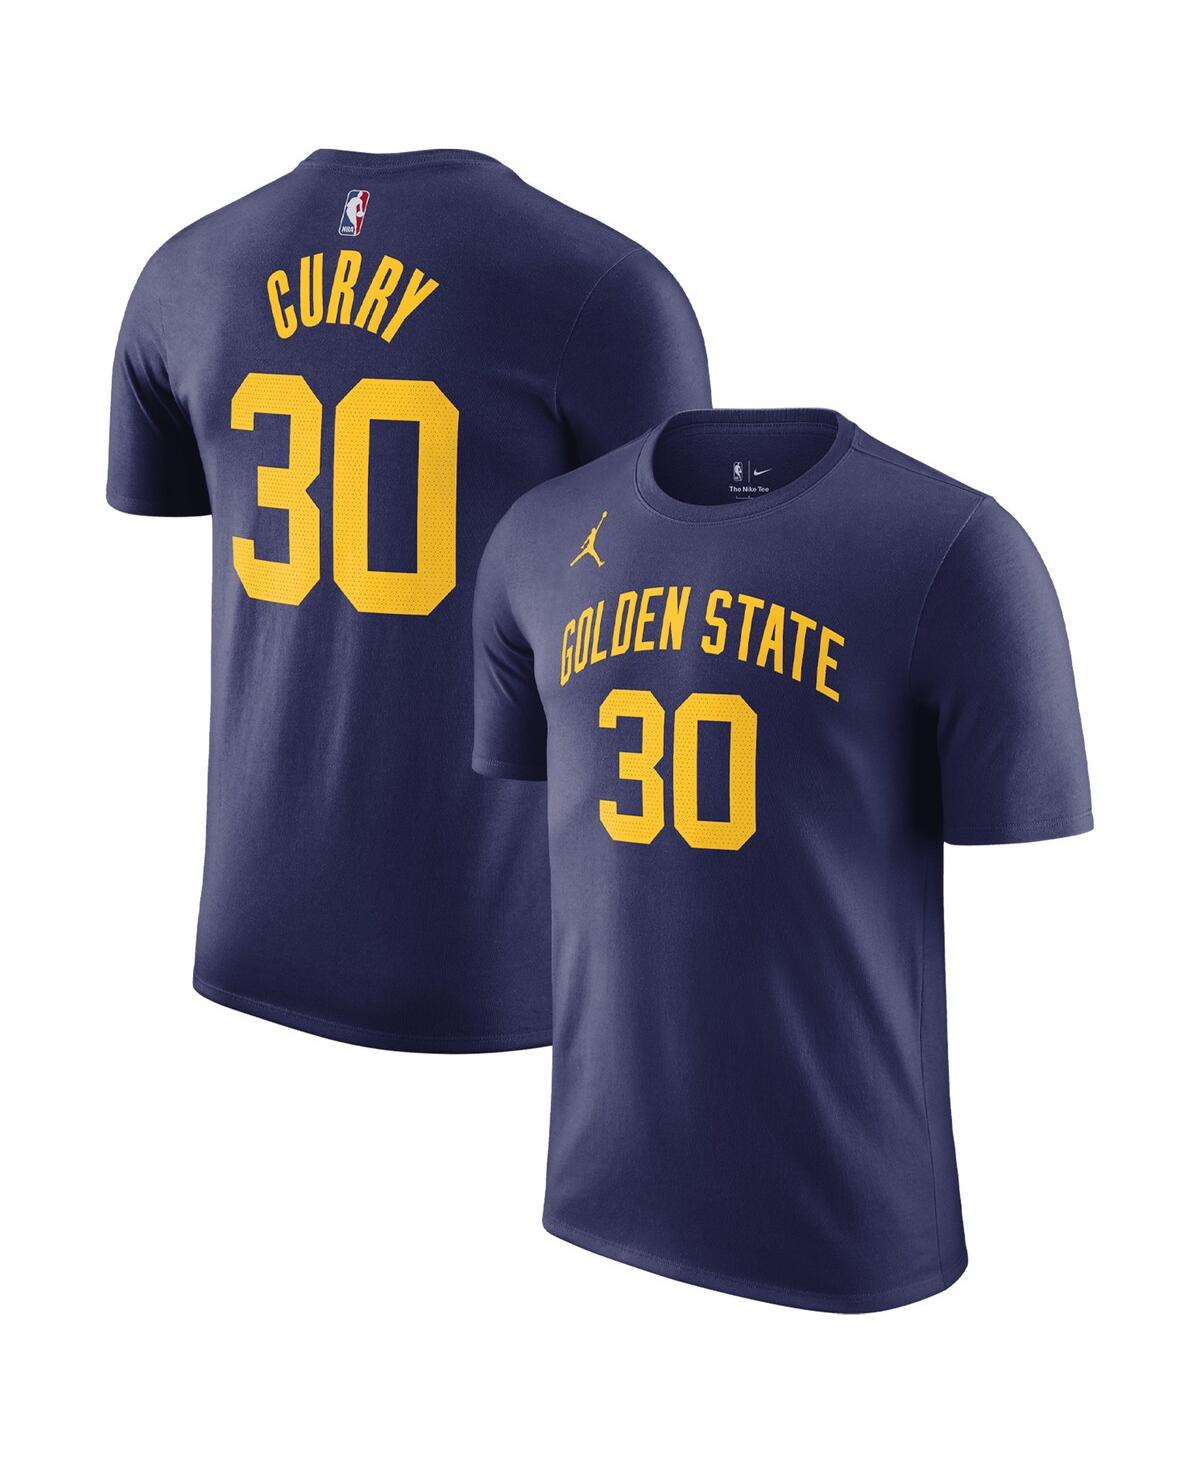 Men's Jordan Stephen Curry Navy Golden State Warriors 2022/23 Statement Edition Name and Number T-shirt - Navy